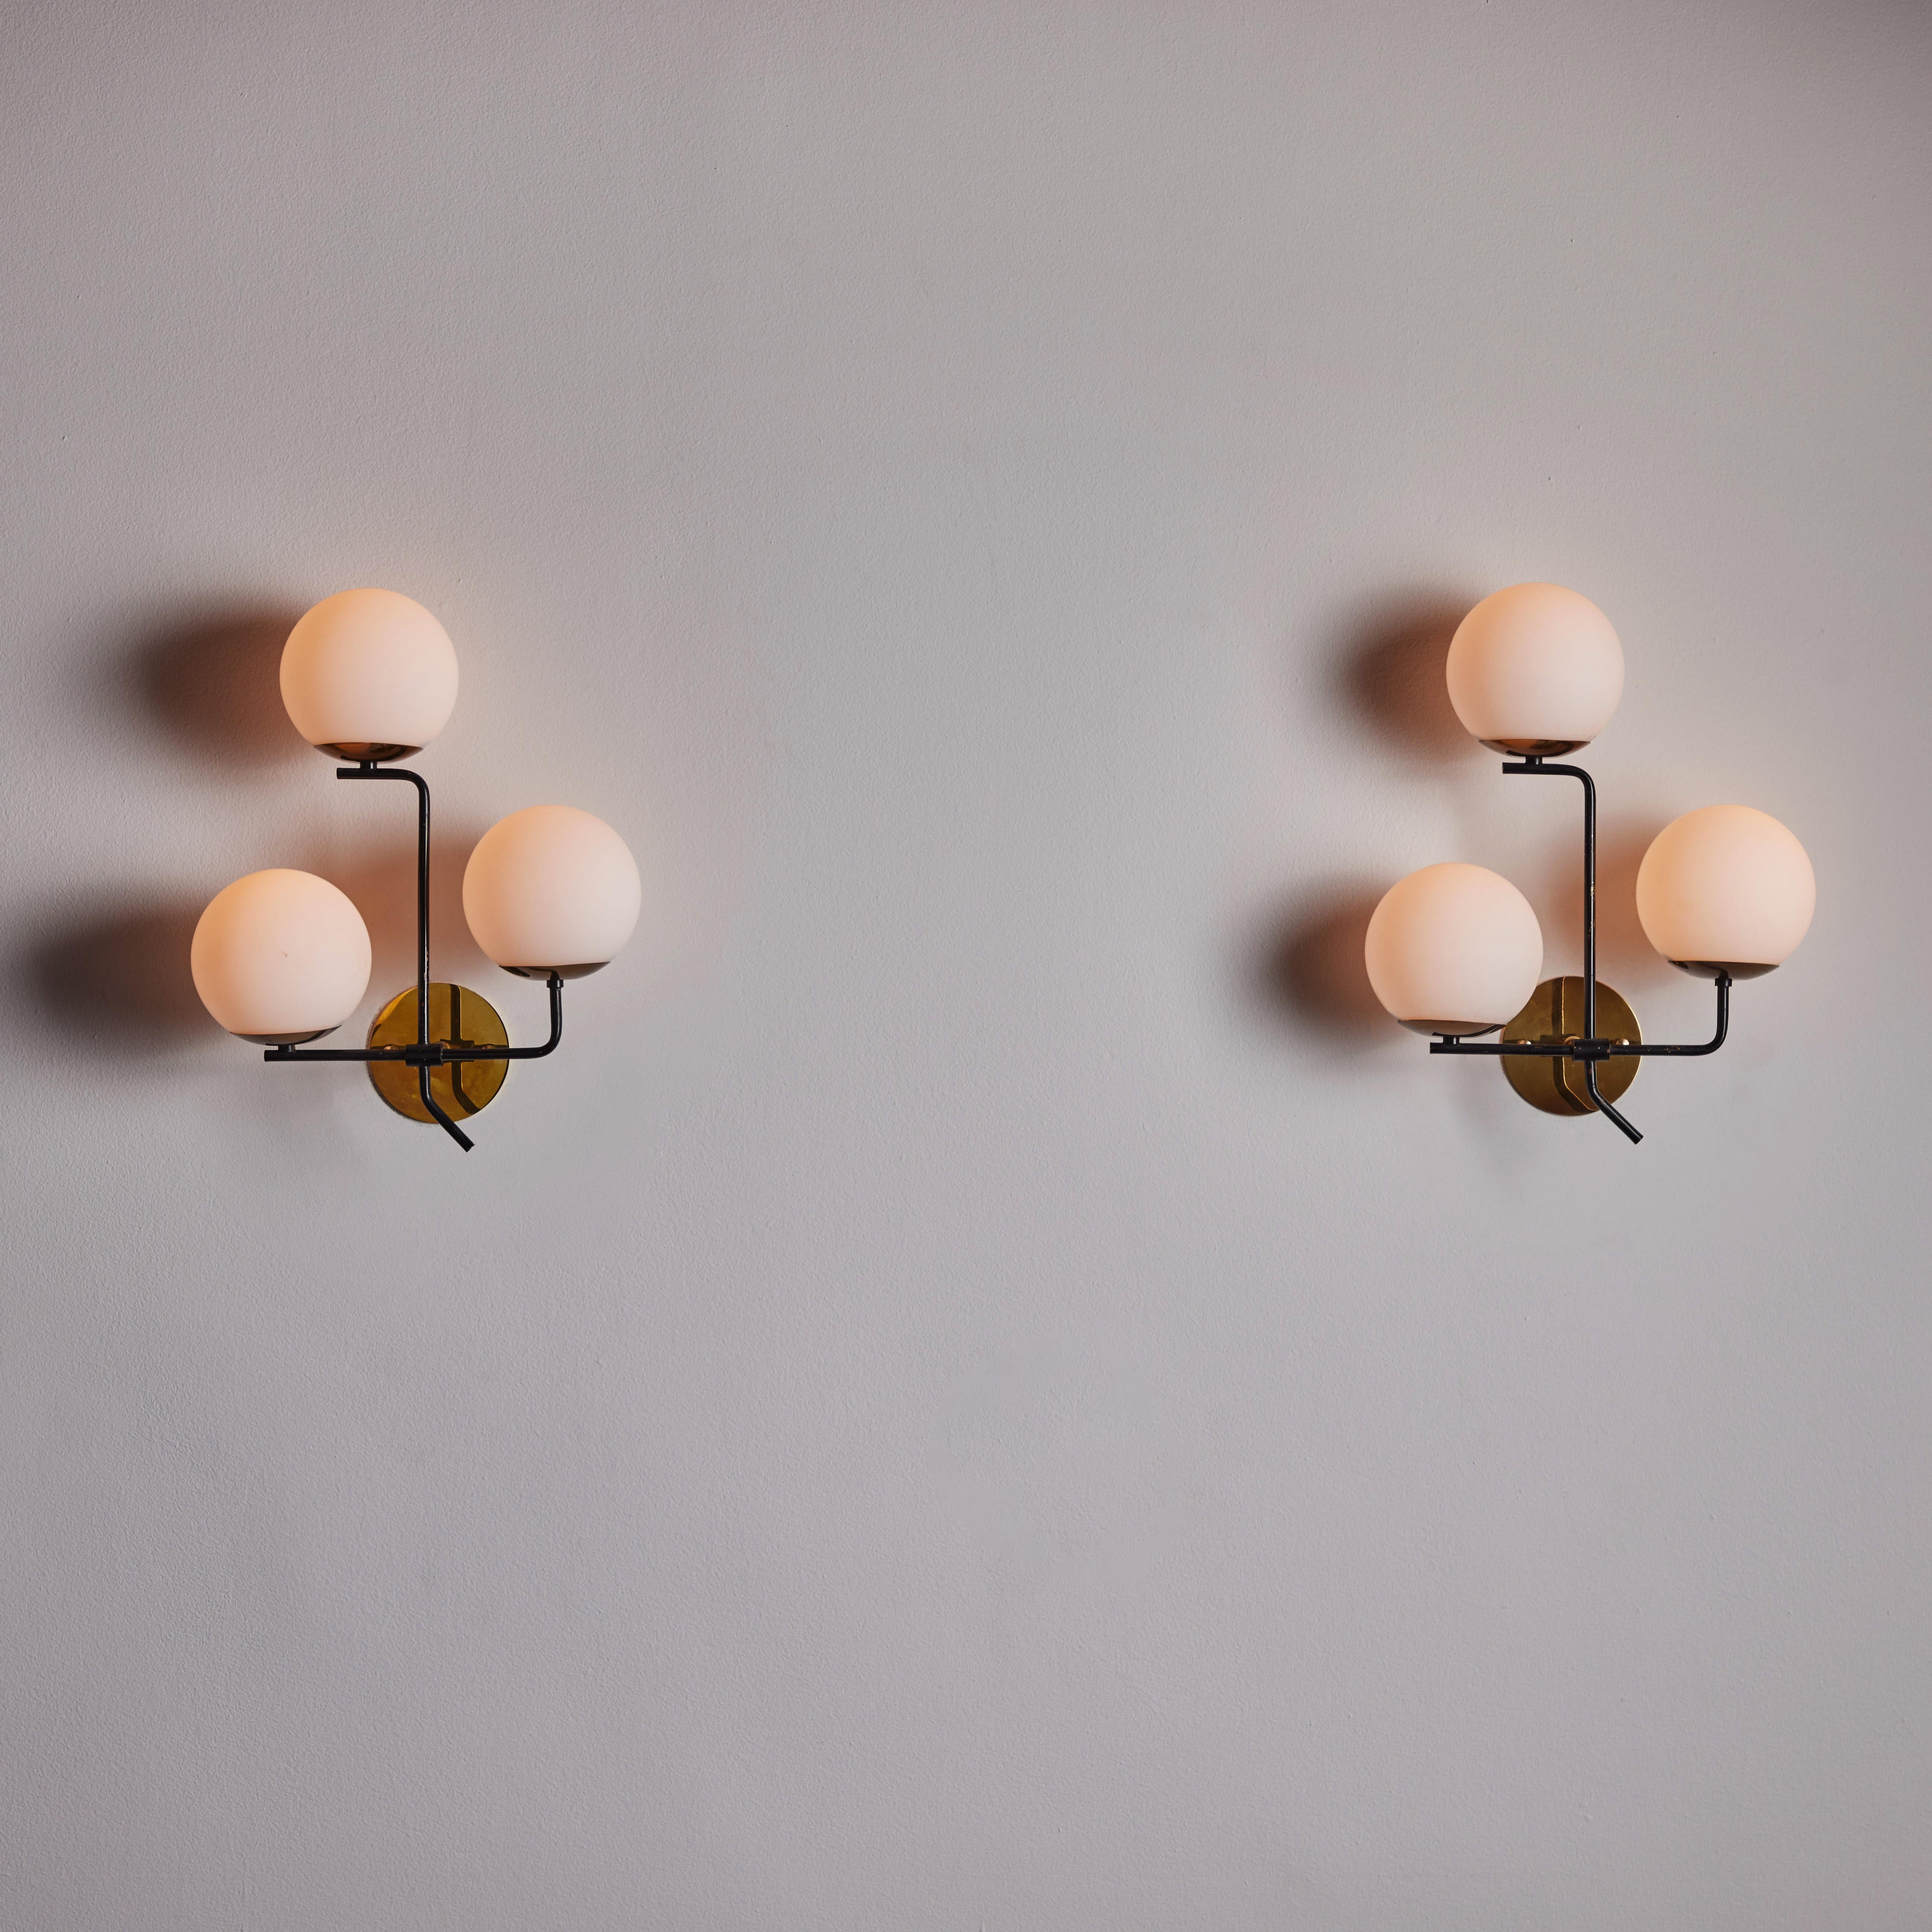 Pair of sconces by Stilnovo. Designed and manufactured in Italy, circa the 1950s. Three-arm stems, each cradling a frosted glass globe. Rewired for U.S. standards. We recommend three E14 20W Max bulbs per fixture. Bulbs are included as a one-time